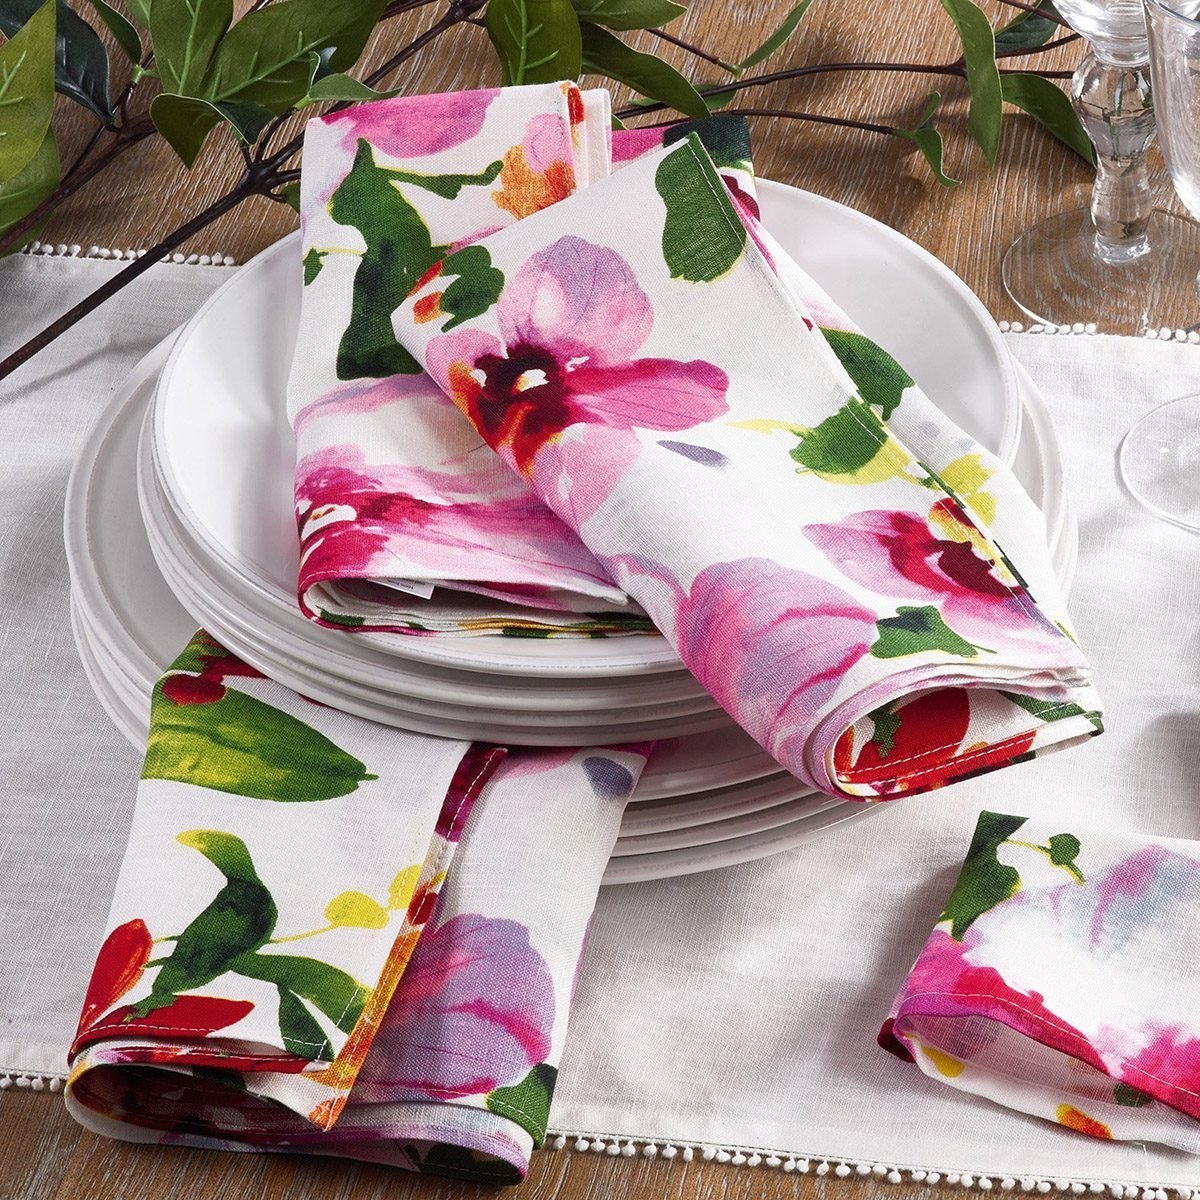 4 Pretty Table Linen Ideas for Picture-Perfect Parties